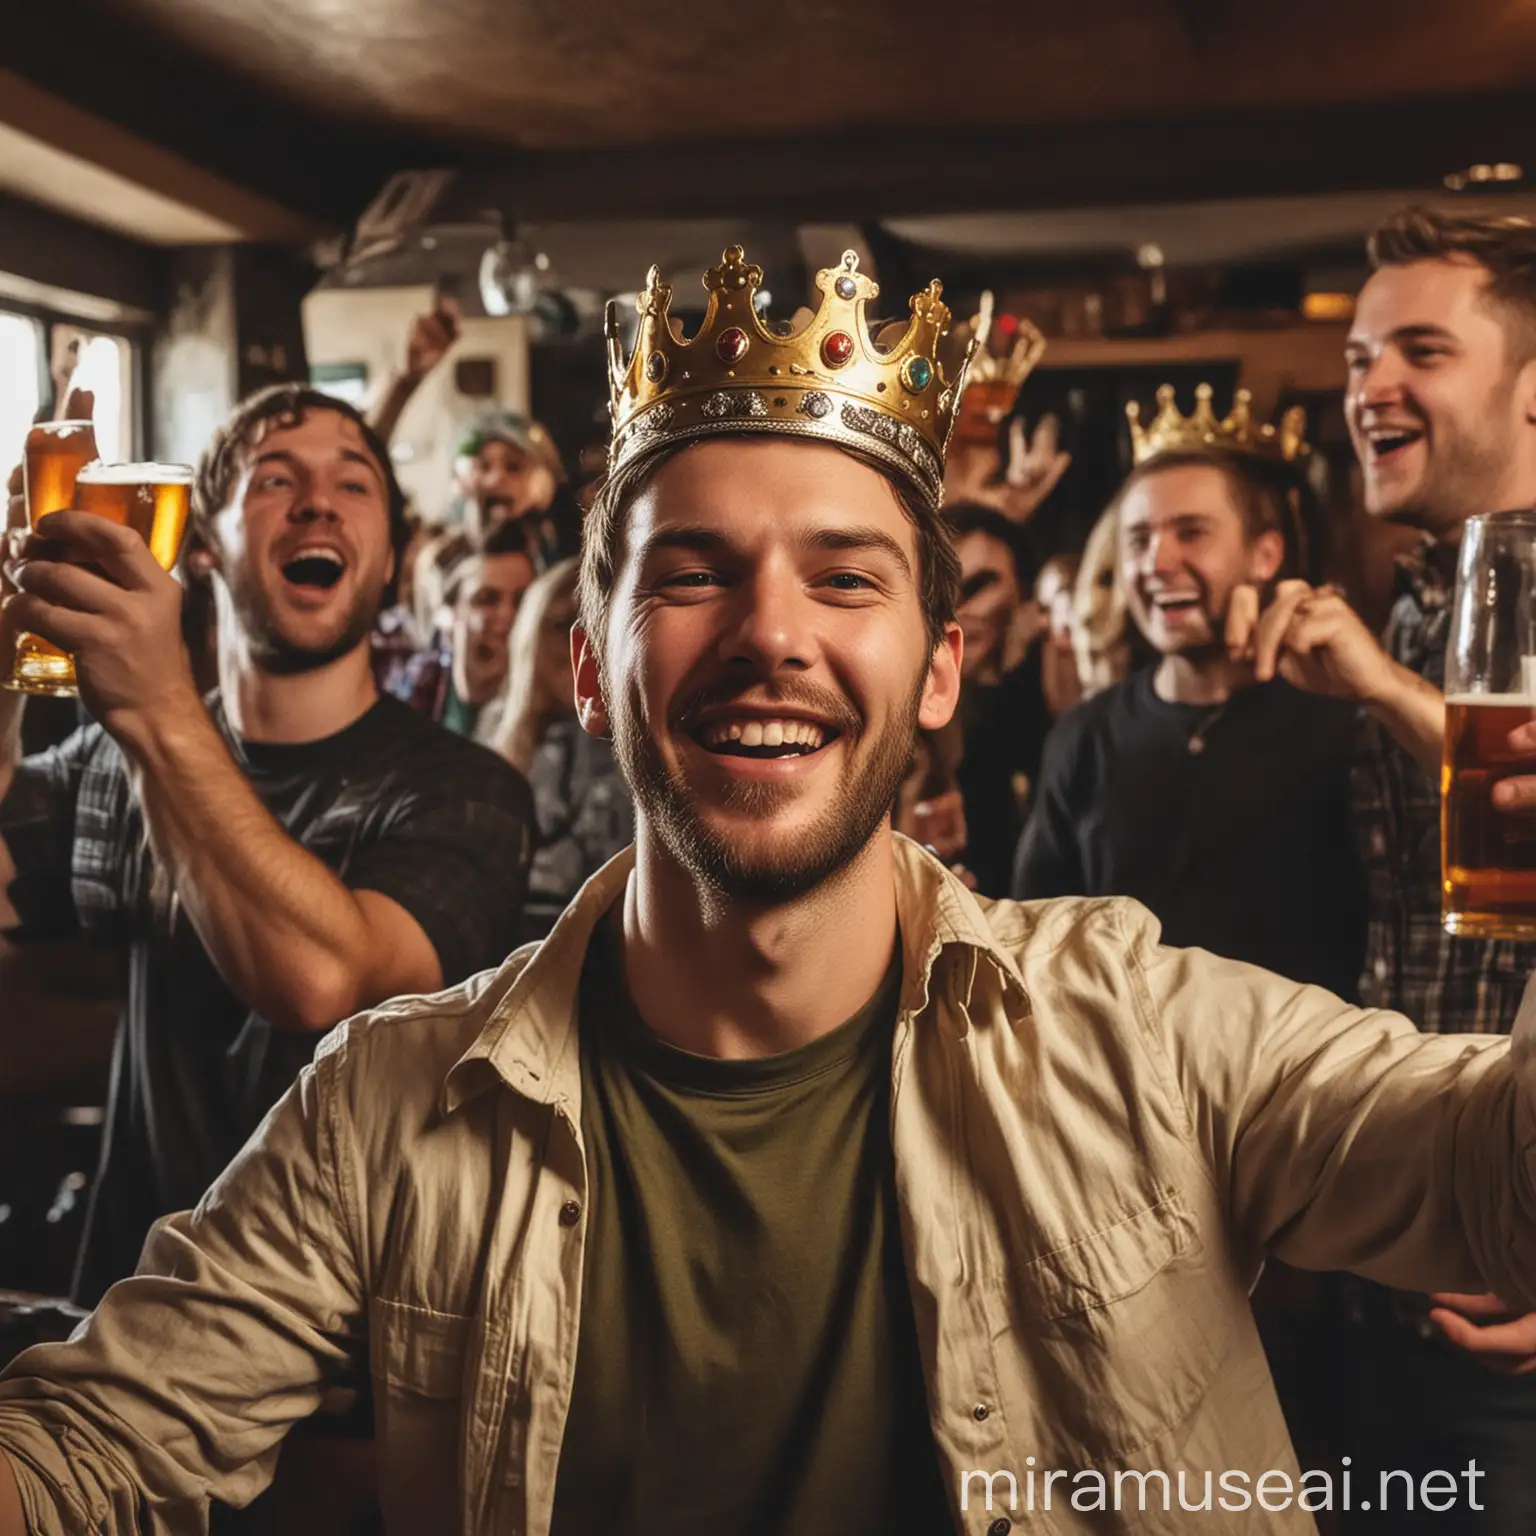 a guy with a crown on his head, proud and holding a beer, is cheered by the other people present in a pub